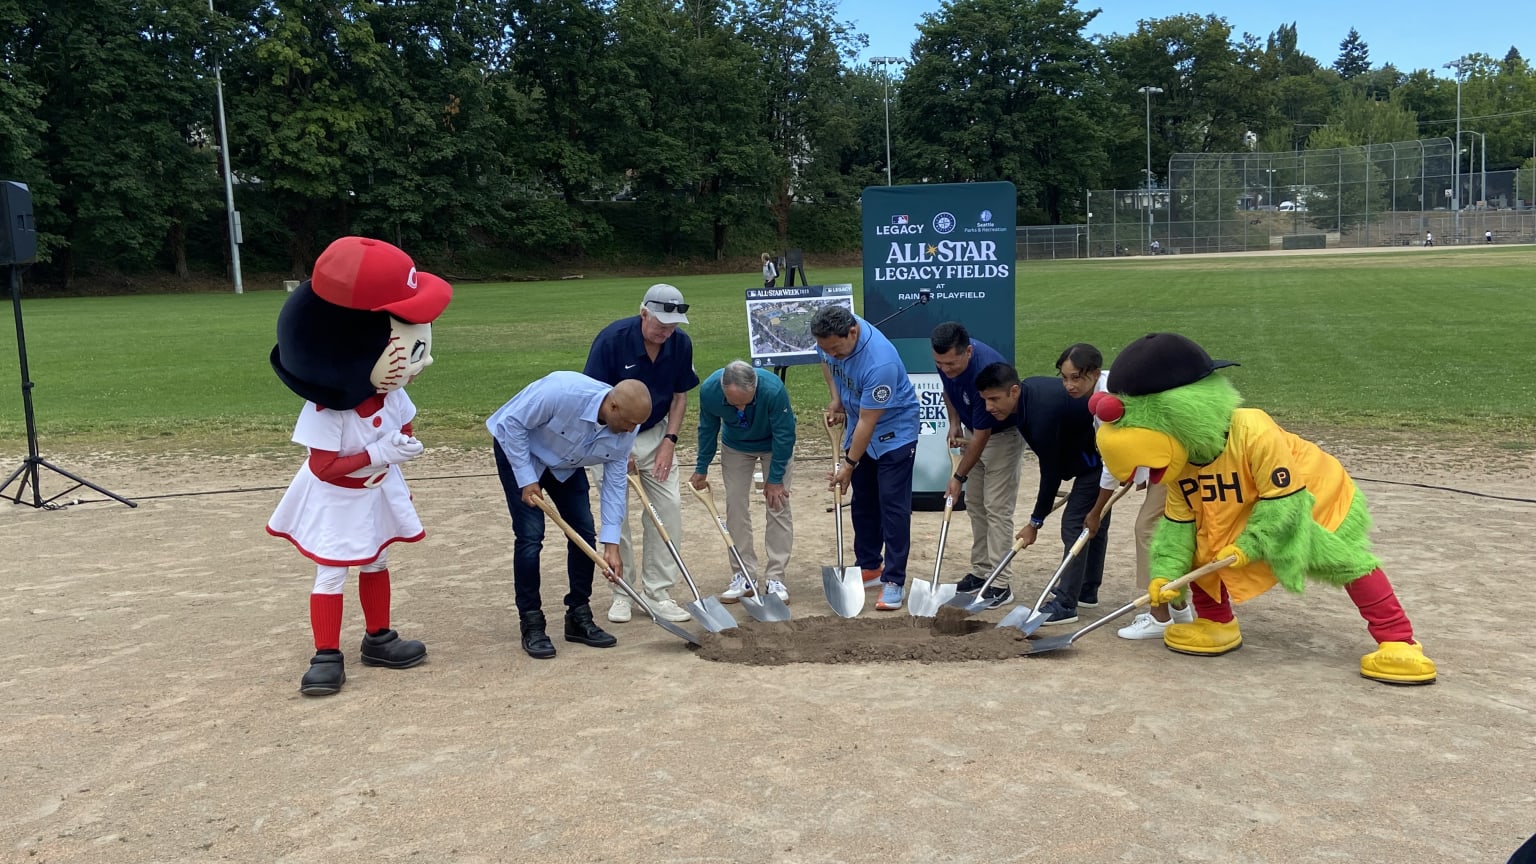 Mascots for the Reds and Pirates help dig into the dirt for a groundbreaking ceremony